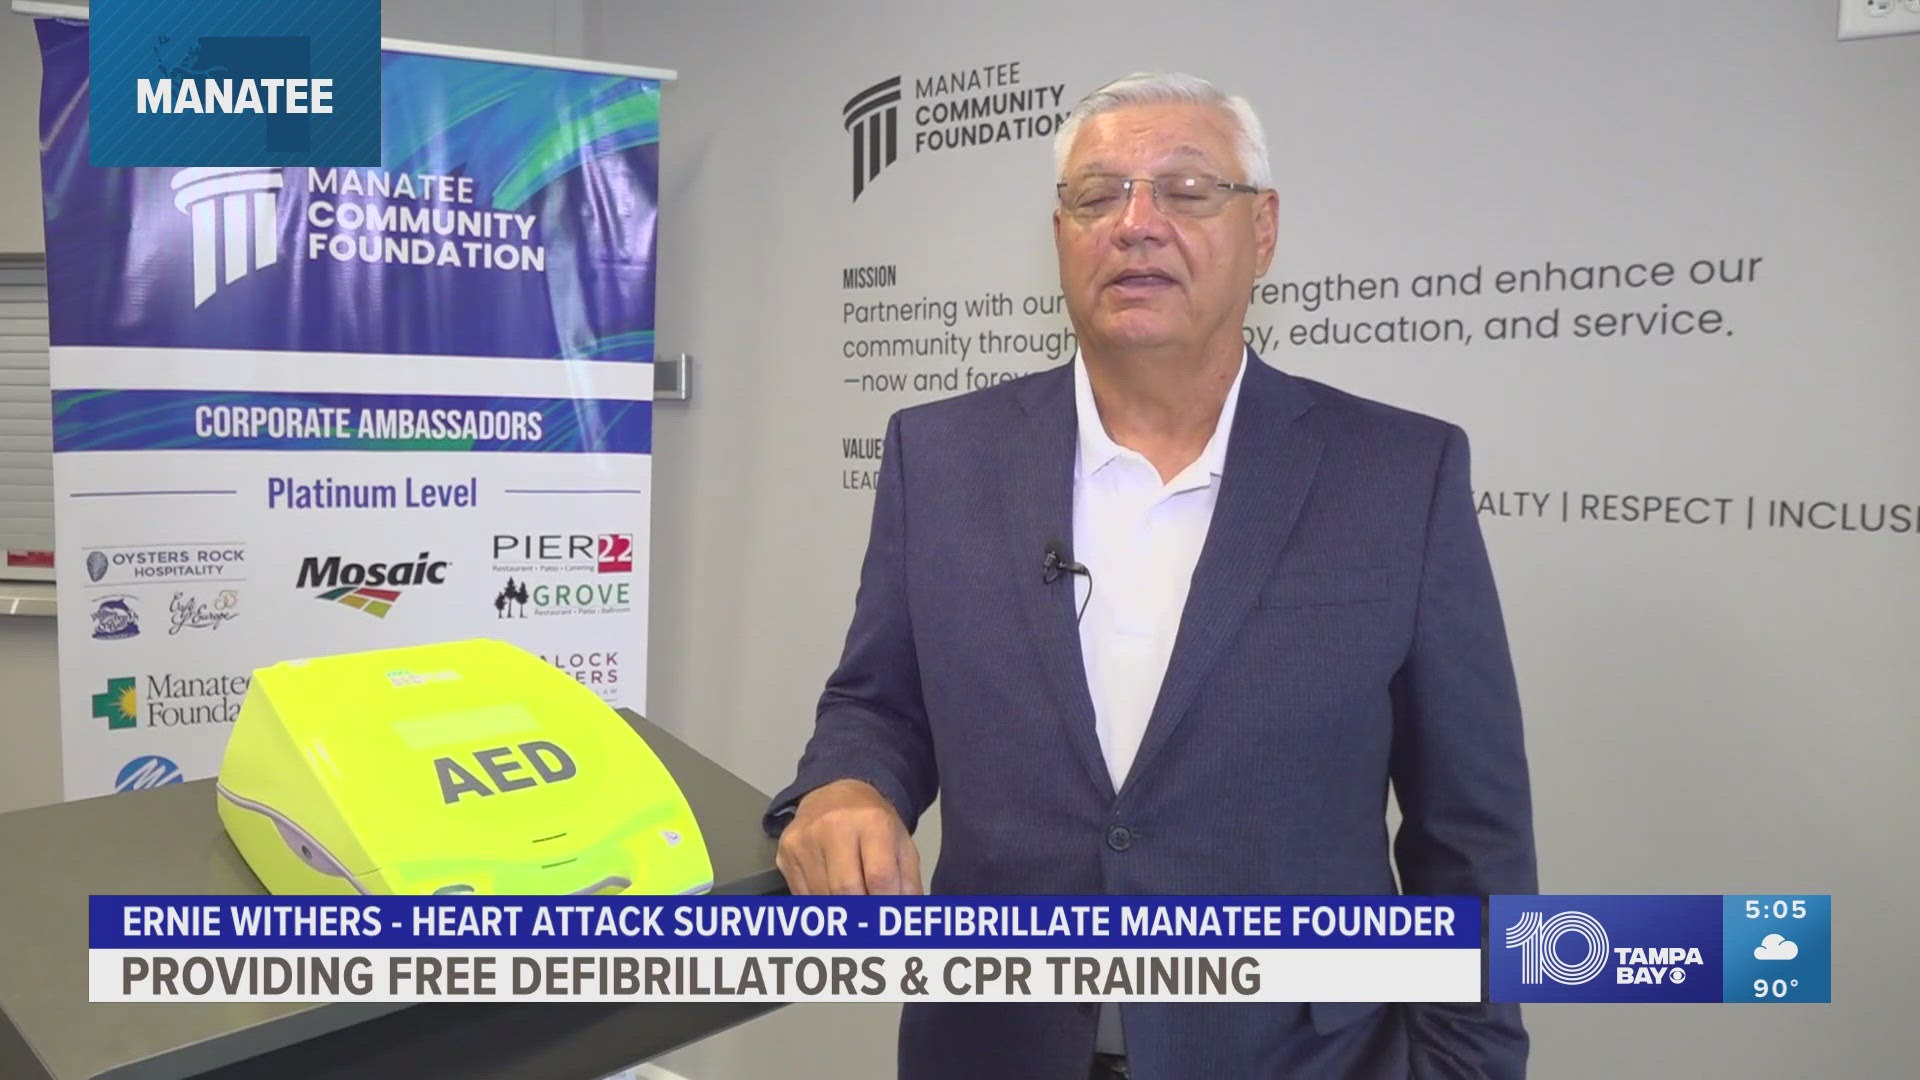 Ernie Withers suffered two cardiac arrests. He founded Defibrillate Manatee to train non-profits on how to use an AED machine, as well as handing out free AEDs.